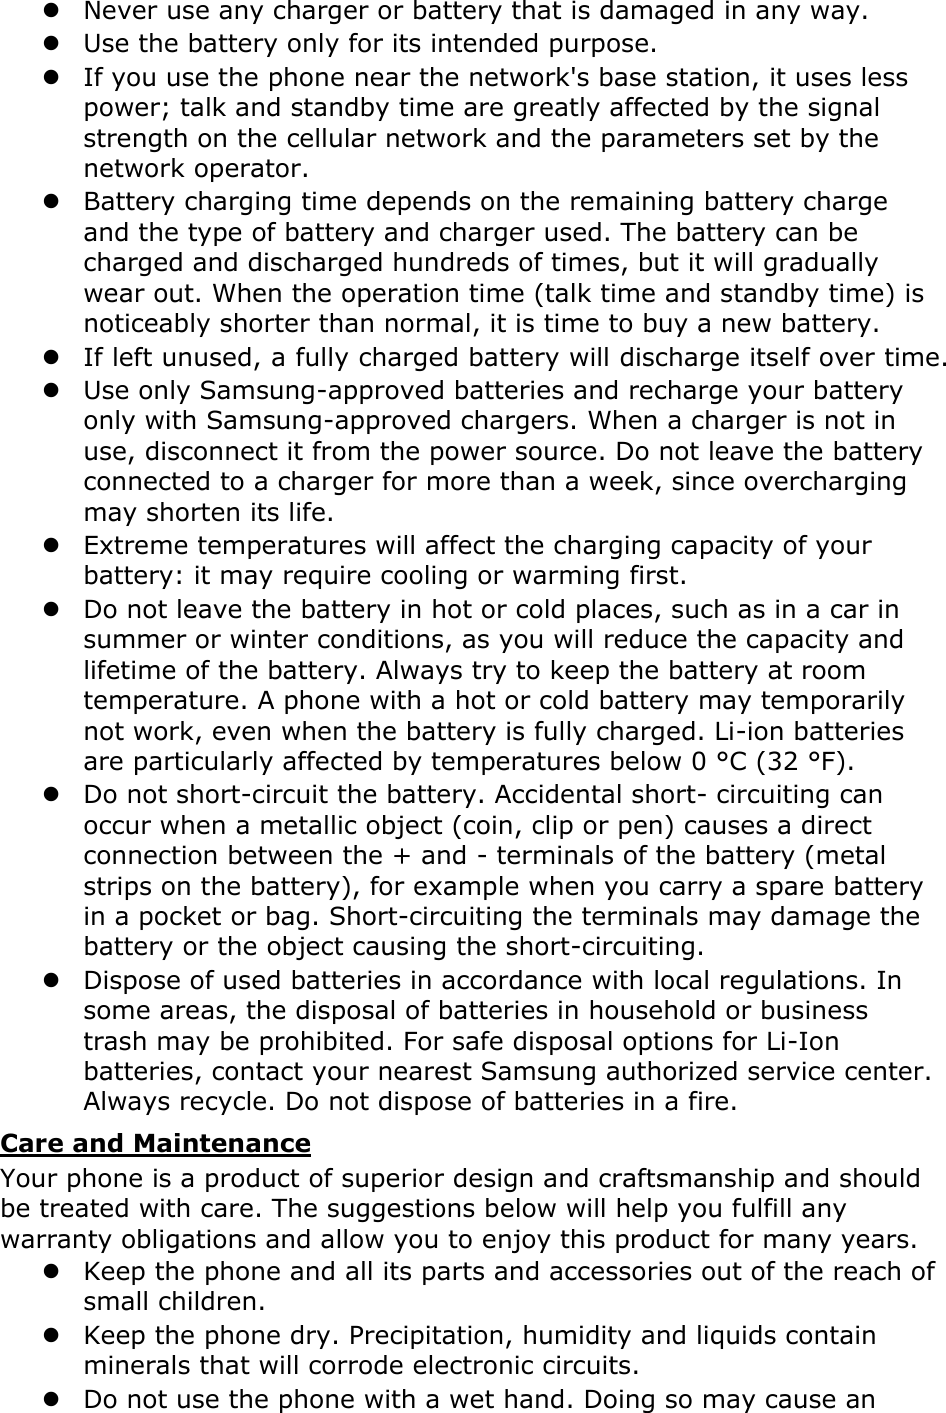  Never use any charger or battery that is damaged in any way.  Use the battery only for its intended purpose.  If you use the phone near the network&apos;s base station, it uses less power; talk and standby time are greatly affected by the signal strength on the cellular network and the parameters set by the network operator.  Battery charging time depends on the remaining battery charge and the type of battery and charger used. The battery can be charged and discharged hundreds of times, but it will gradually wear out. When the operation time (talk time and standby time) is noticeably shorter than normal, it is time to buy a new battery.  If left unused, a fully charged battery will discharge itself over time.  Use only Samsung-approved batteries and recharge your battery only with Samsung-approved chargers. When a charger is not in use, disconnect it from the power source. Do not leave the battery connected to a charger for more than a week, since overcharging may shorten its life.  Extreme temperatures will affect the charging capacity of your battery: it may require cooling or warming first.  Do not leave the battery in hot or cold places, such as in a car in summer or winter conditions, as you will reduce the capacity and lifetime of the battery. Always try to keep the battery at room temperature. A phone with a hot or cold battery may temporarily not work, even when the battery is fully charged. Li-ion batteries are particularly affected by temperatures below 0 °C (32 °F).  Do not short-circuit the battery. Accidental short- circuiting can occur when a metallic object (coin, clip or pen) causes a direct connection between the + and - terminals of the battery (metal strips on the battery), for example when you carry a spare battery in a pocket or bag. Short-circuiting the terminals may damage the battery or the object causing the short-circuiting.  Dispose of used batteries in accordance with local regulations. In some areas, the disposal of batteries in household or business trash may be prohibited. For safe disposal options for Li-Ion batteries, contact your nearest Samsung authorized service center. Always recycle. Do not dispose of batteries in a fire. Care and Maintenance Your phone is a product of superior design and craftsmanship and should be treated with care. The suggestions below will help you fulfill any warranty obligations and allow you to enjoy this product for many years.  Keep the phone and all its parts and accessories out of the reach of small children.  Keep the phone dry. Precipitation, humidity and liquids contain minerals that will corrode electronic circuits.  Do not use the phone with a wet hand. Doing so may cause an 